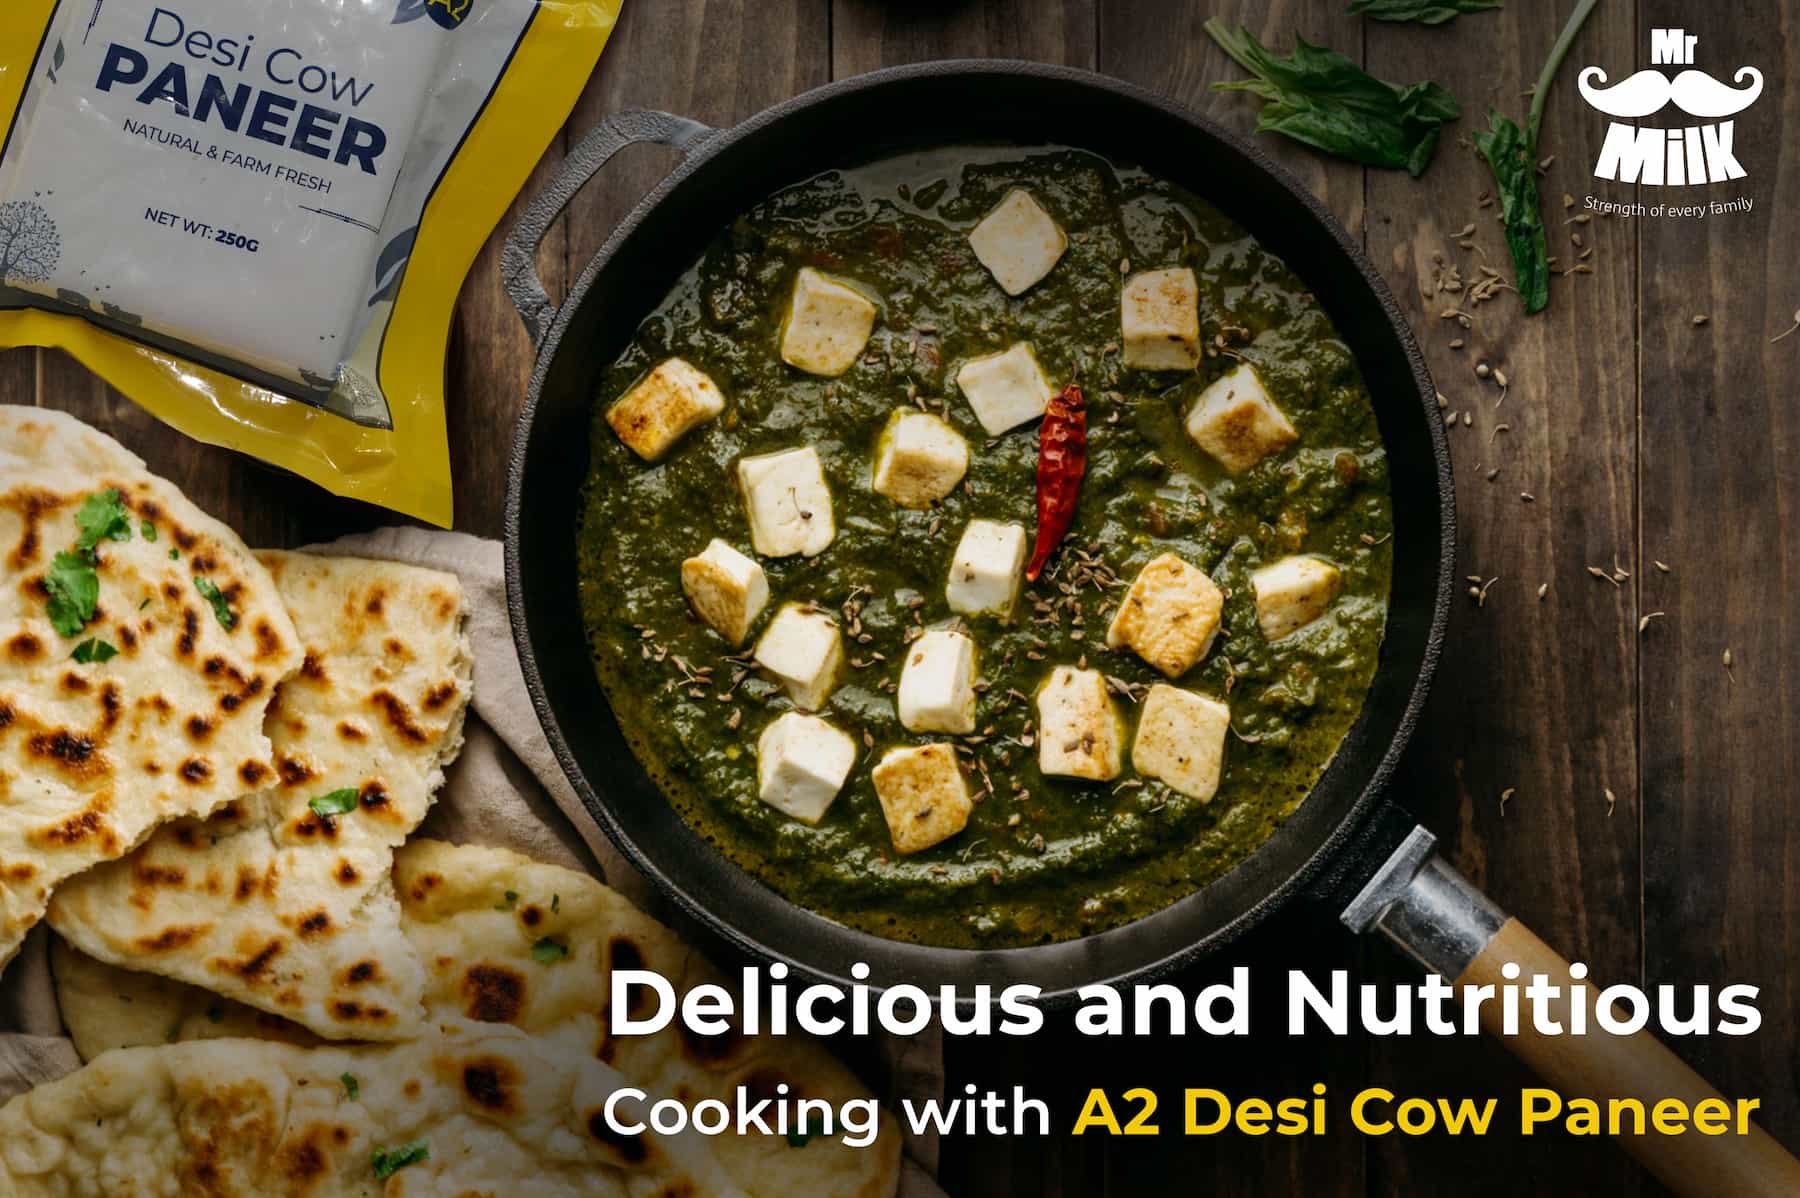 Cooking with A2 Desi Cow Paneer | Delicious and Nutritious